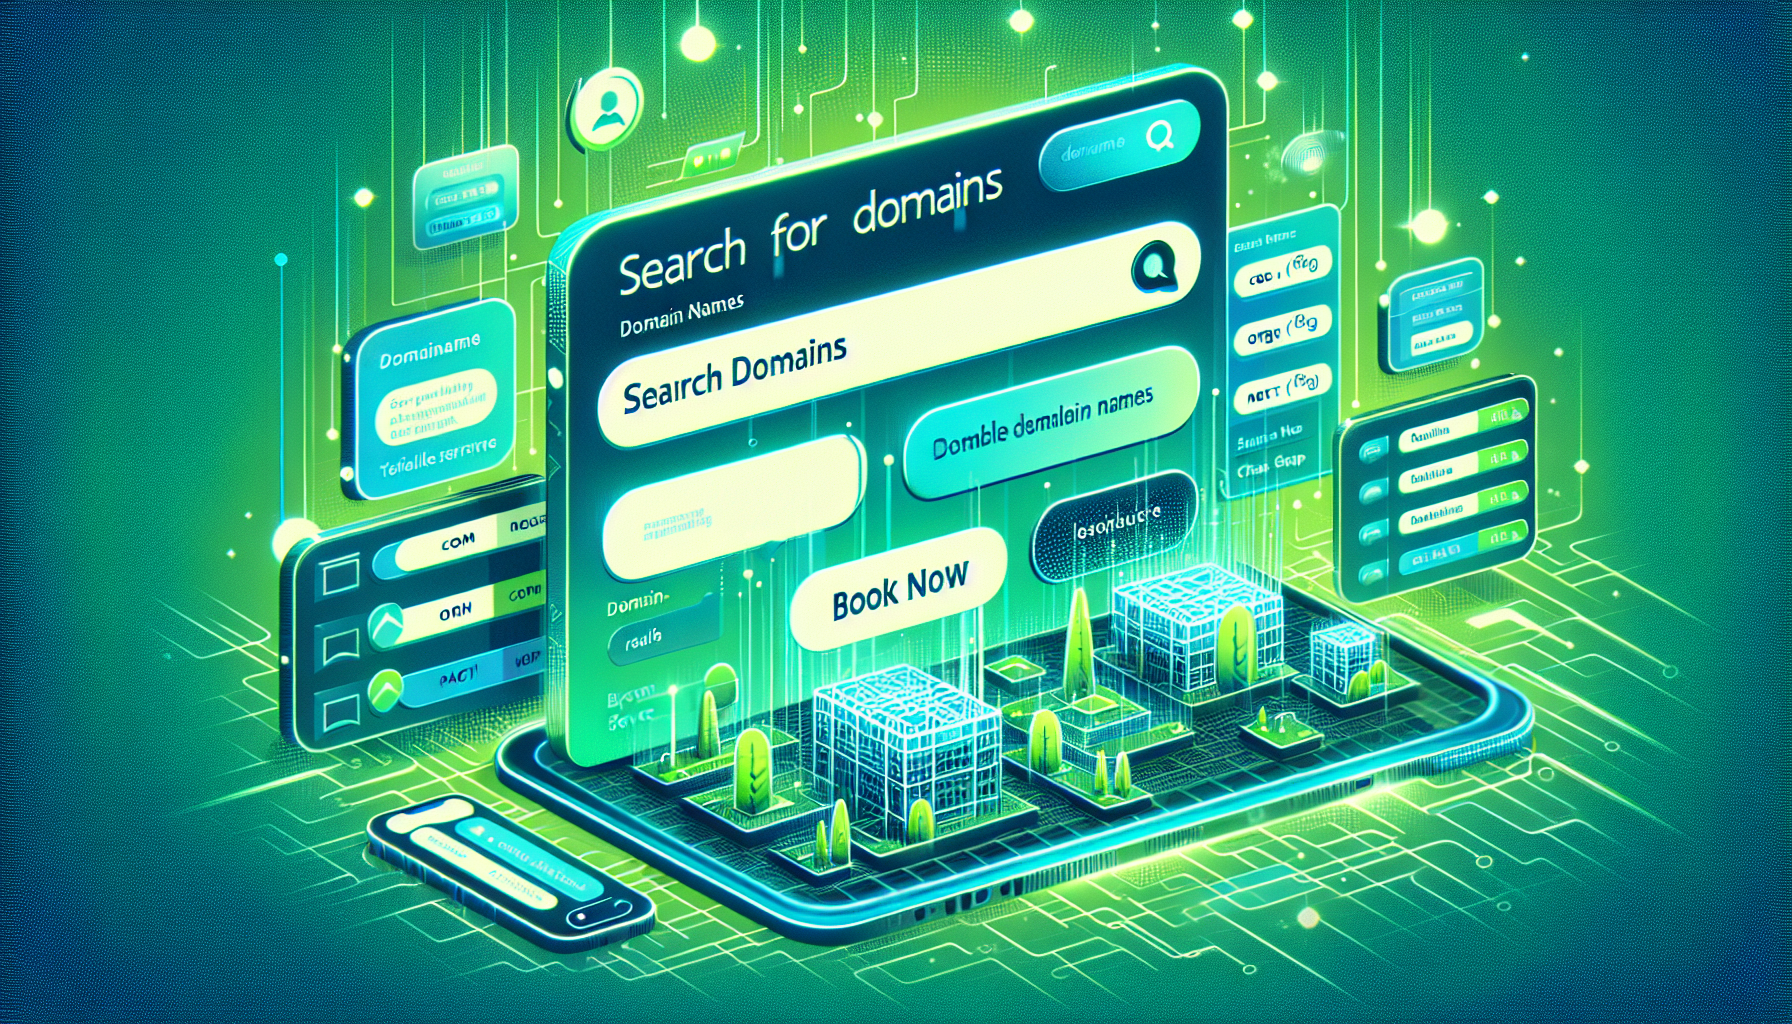 Digital illustration of a futuristic domain search user interface on a green and blue glowing background, featuring seamless domain management options with Flexi Domain and a prominent "Book Now" button.